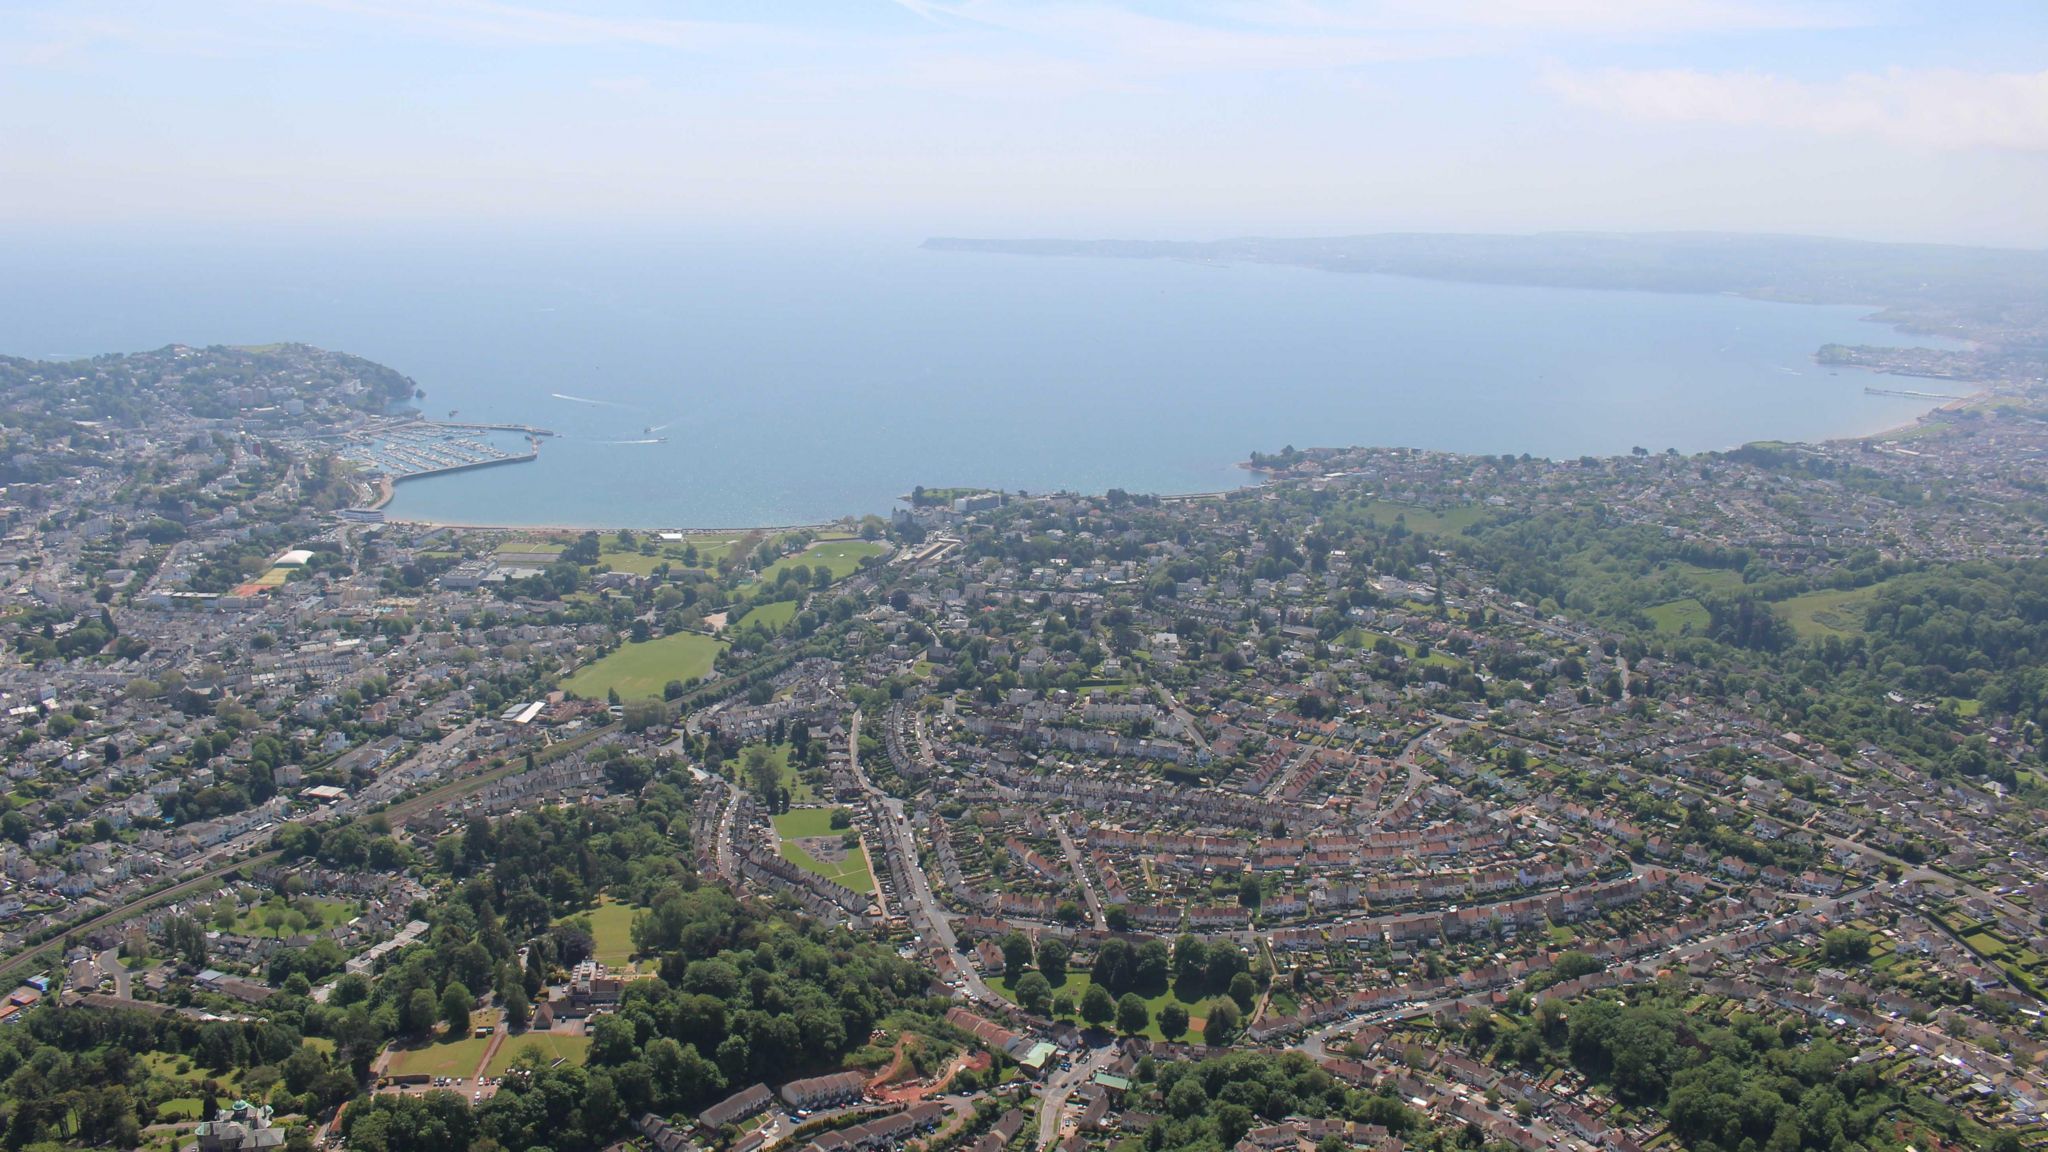 Torbay seen from the air